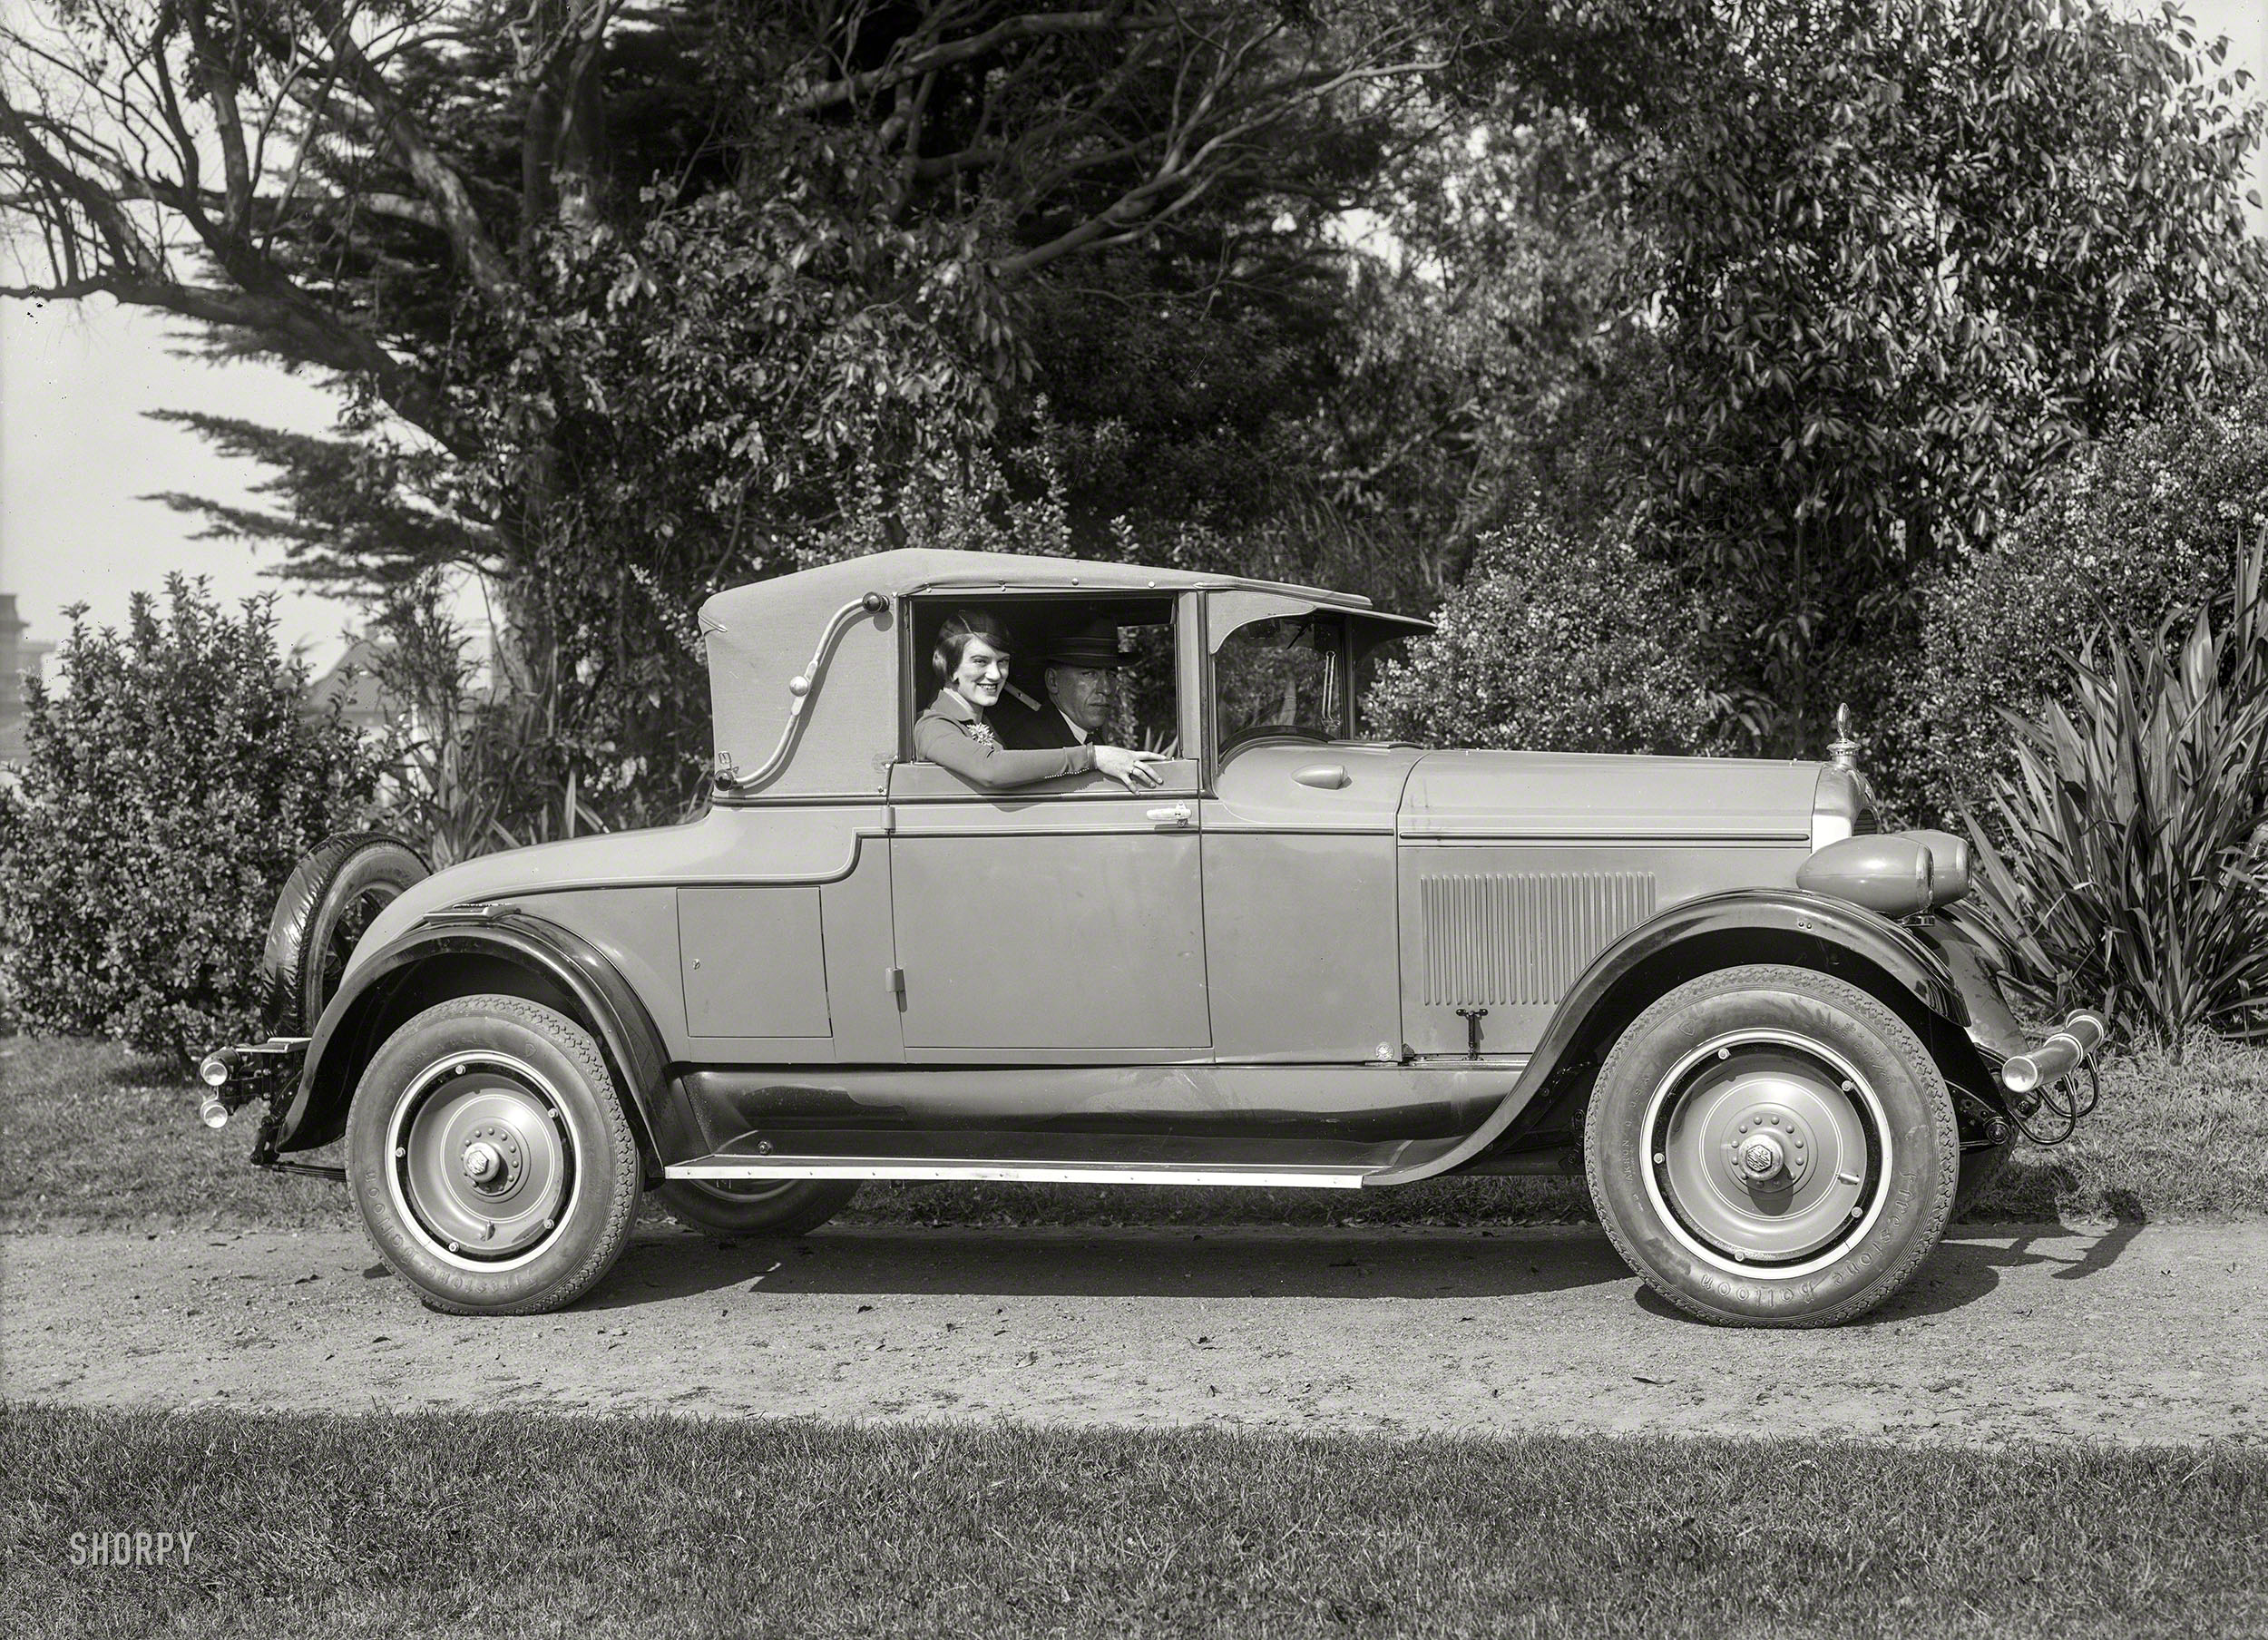 San Francisco circa 1927. "Paige Cabriolet Roadster." Today's entry on the Shorpy Roster of Rusty Relics. 5x7 glass negative by Christopher Helin. View full size.